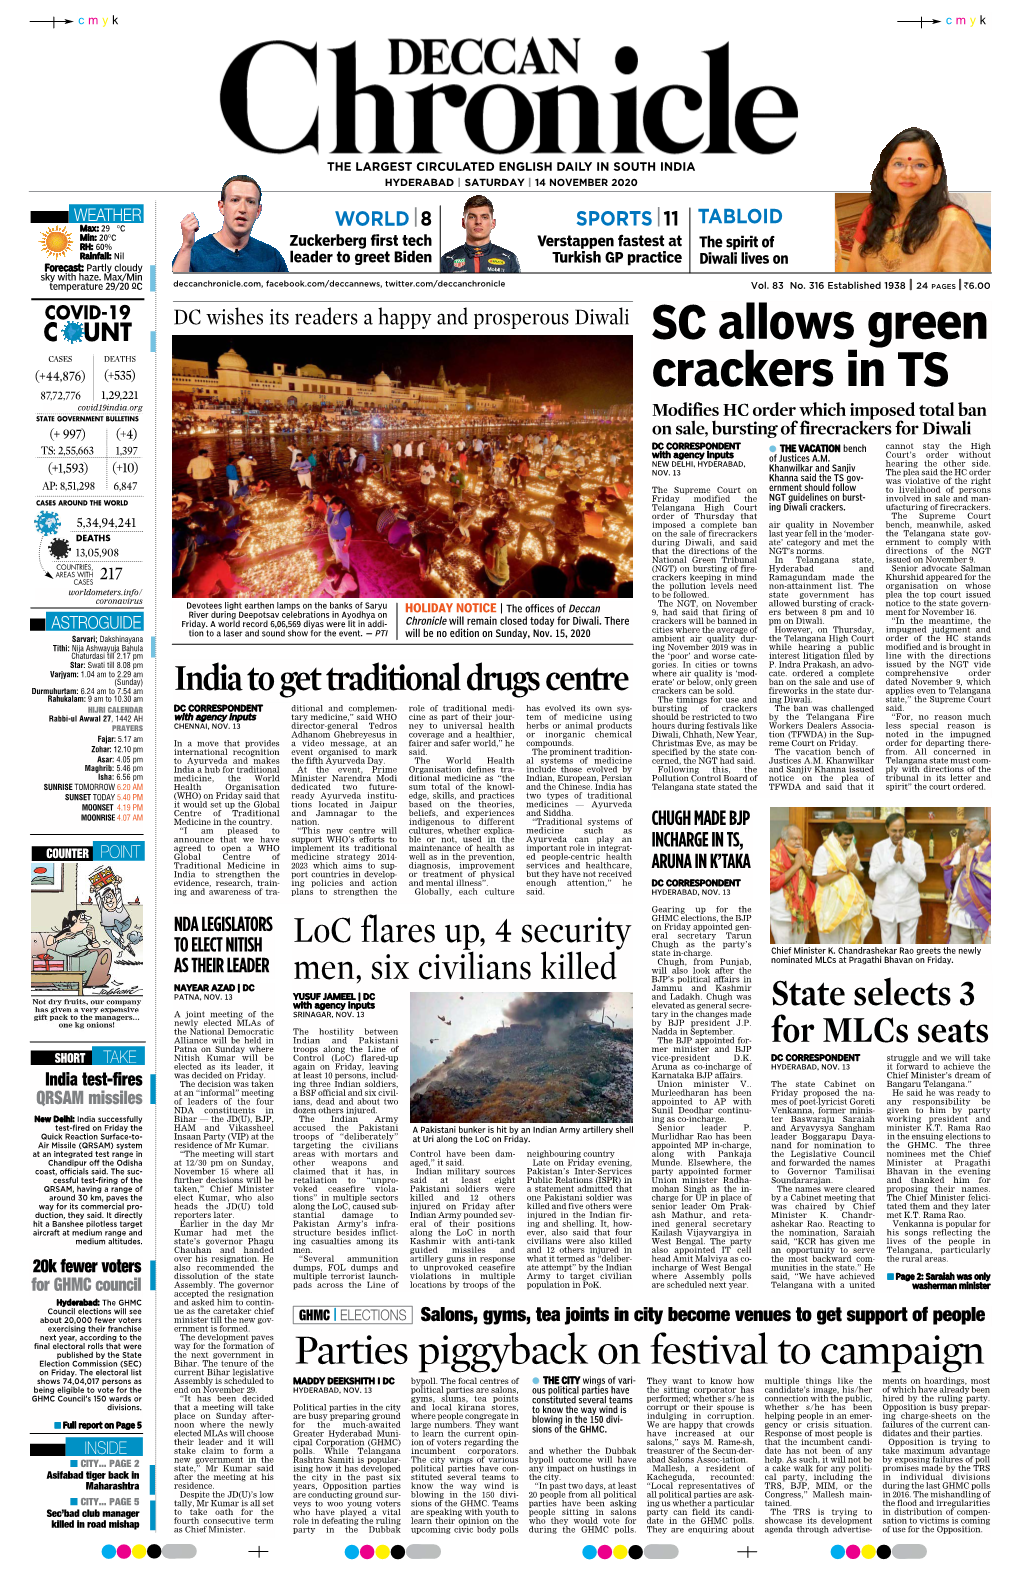 SC Allows Green Crackers in TS